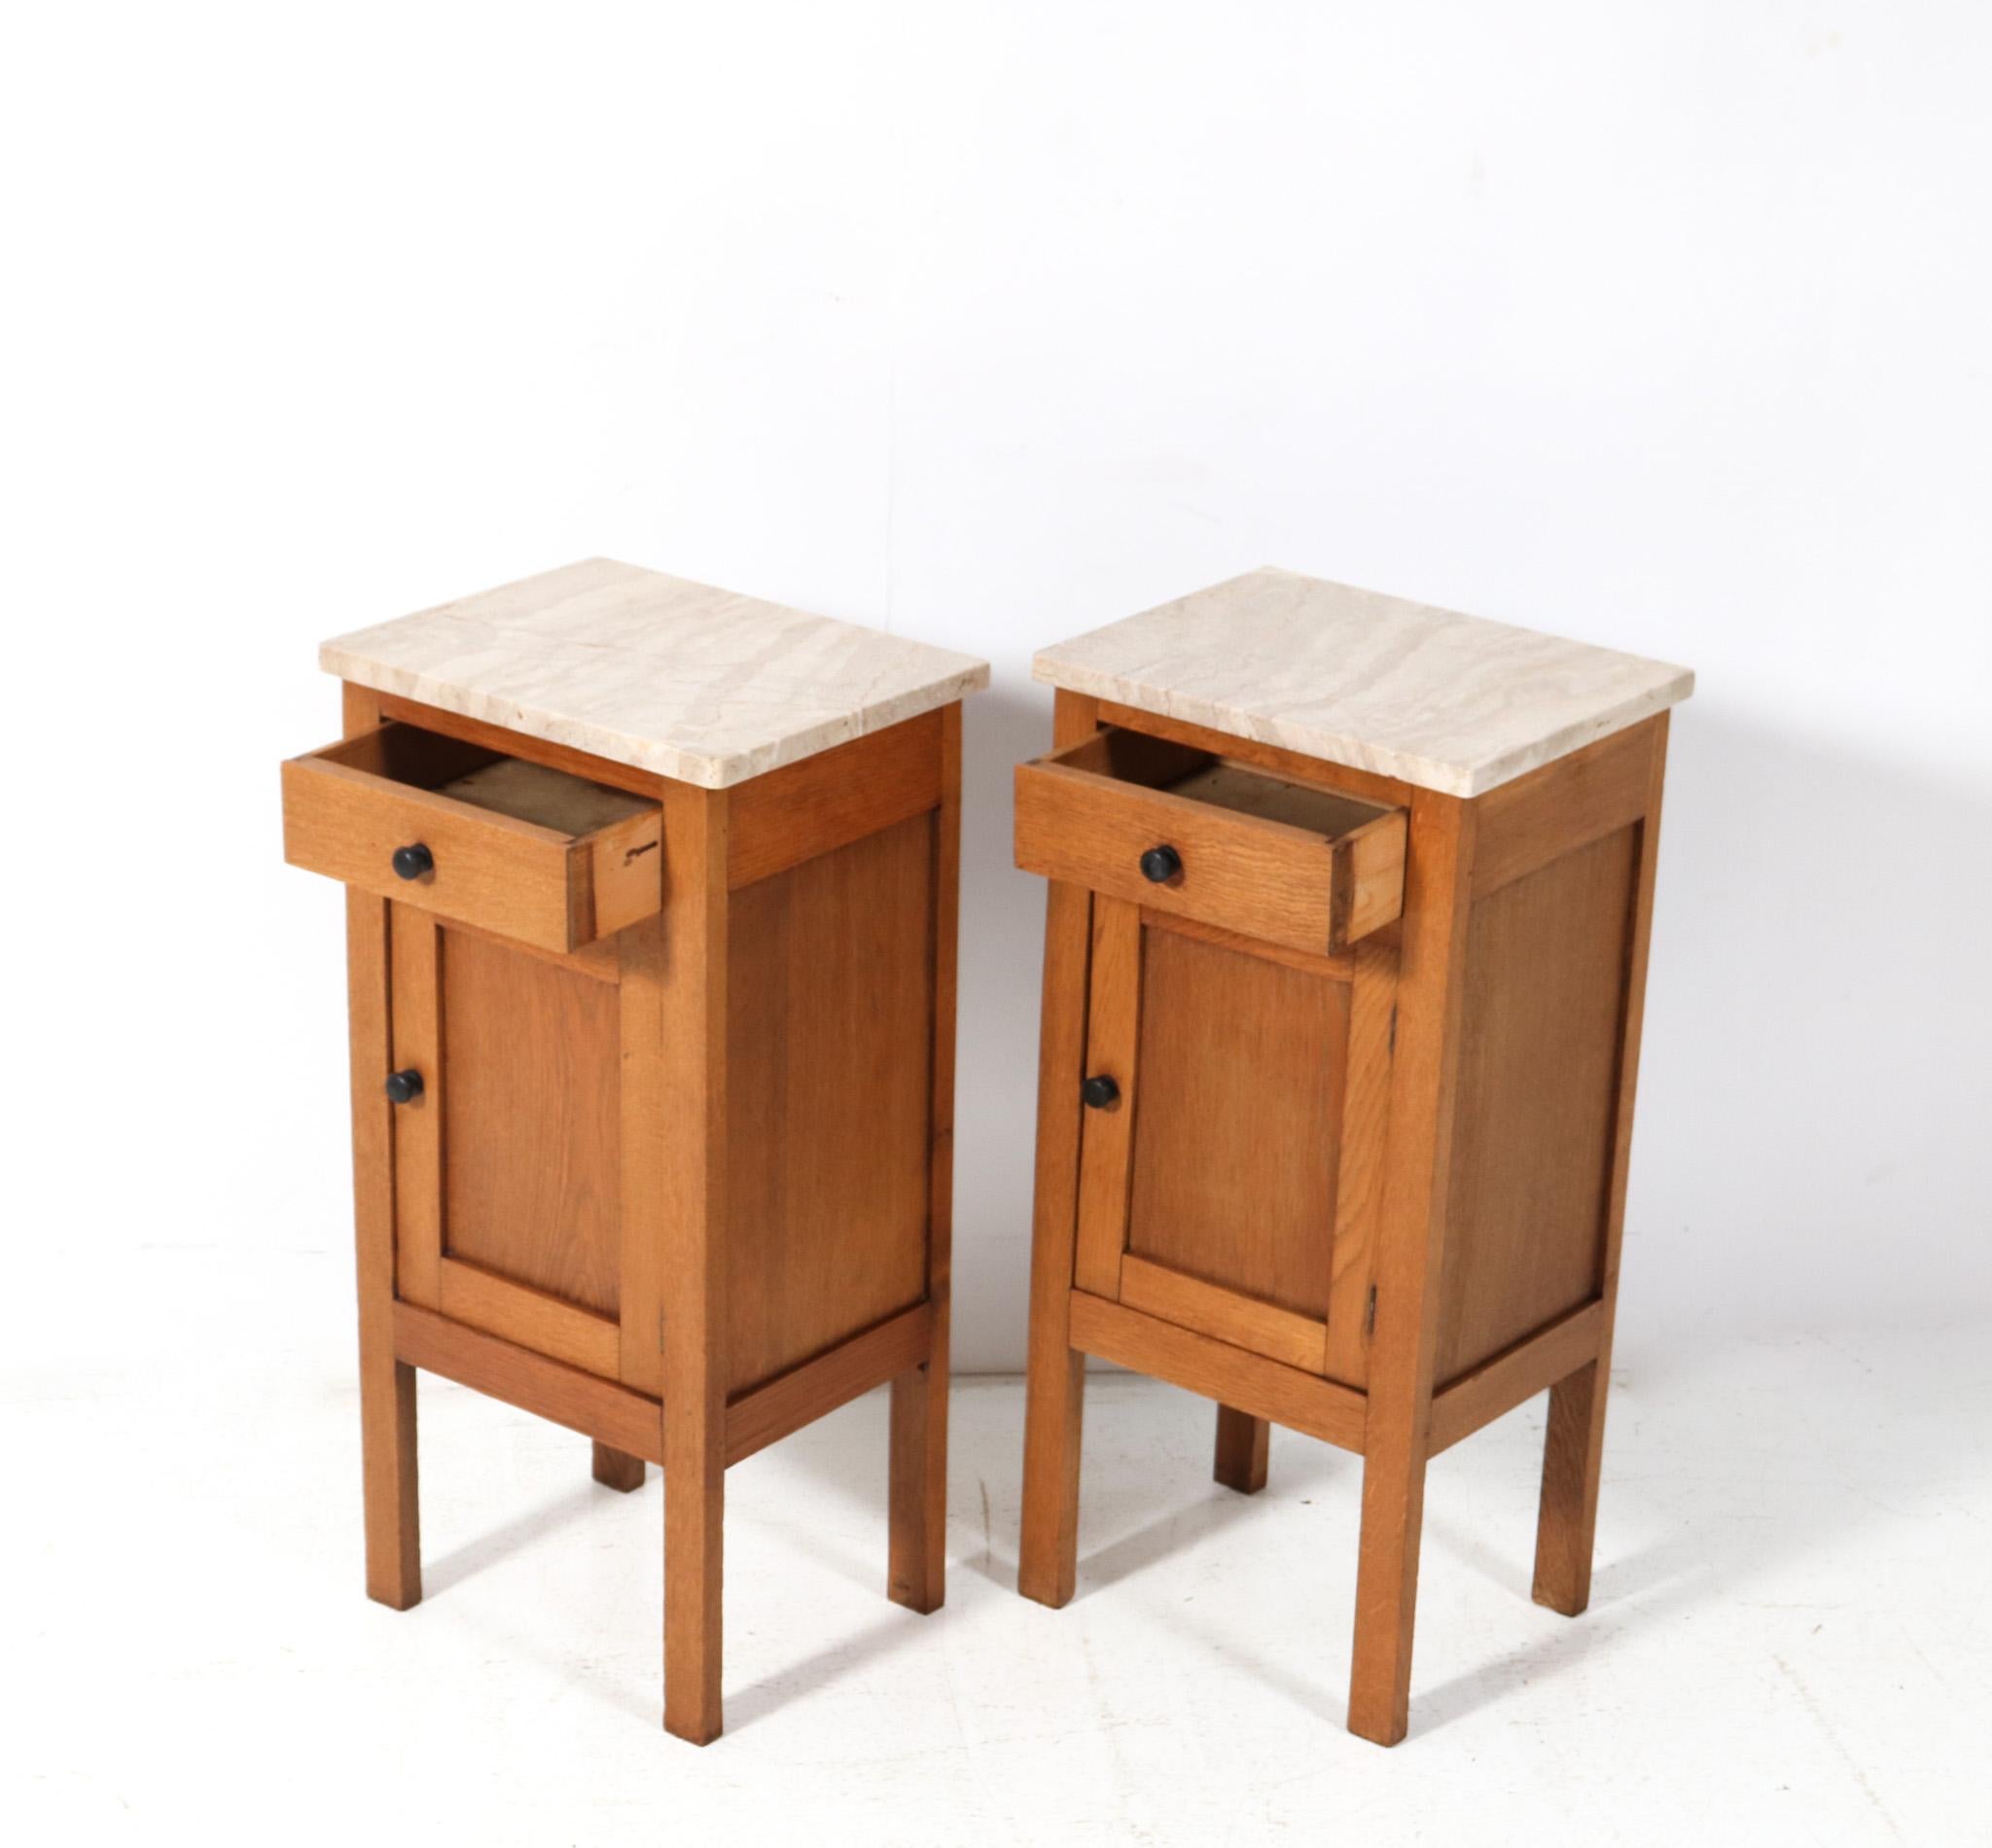 Marble Two Arts & Crafts Art Nouveau Oak Nightstands or Bedside Tables, 1900s For Sale